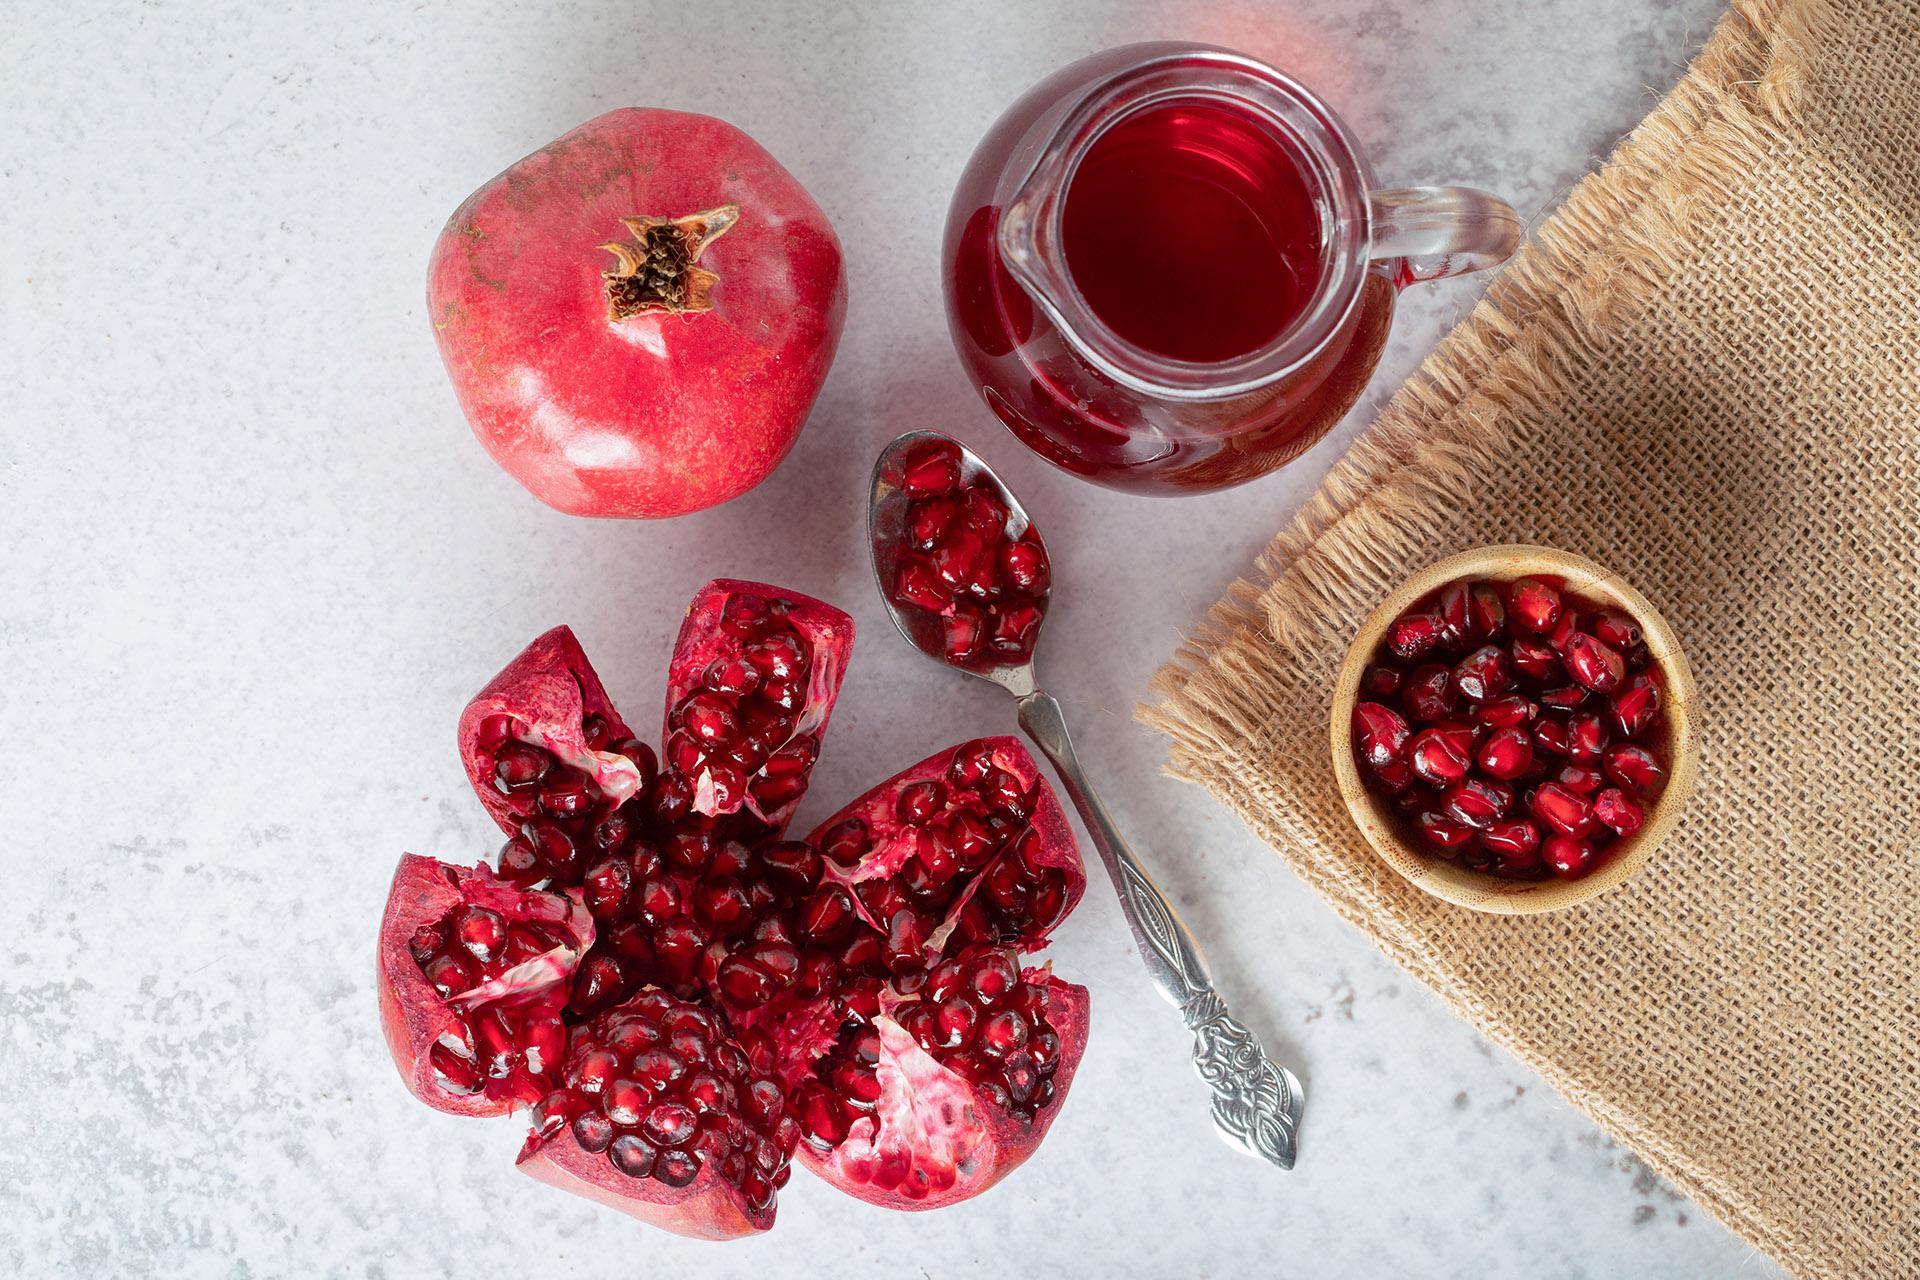 Pomegranate Benefits: Nutritional Value and Advantages